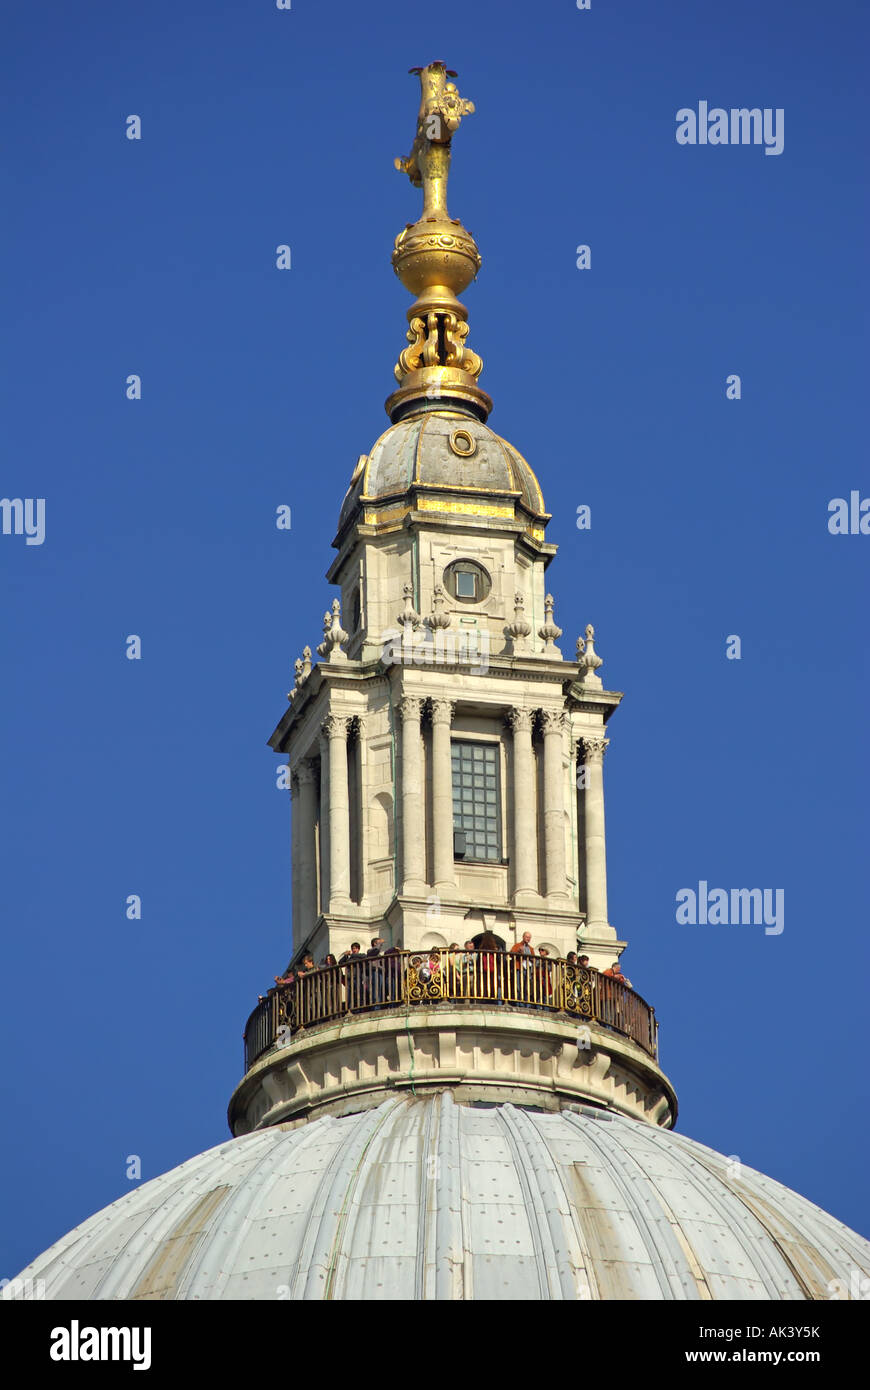 Tourists on viewing platform of Golden gallery at top of the dome of St Pauls cathedral London Stock Photo